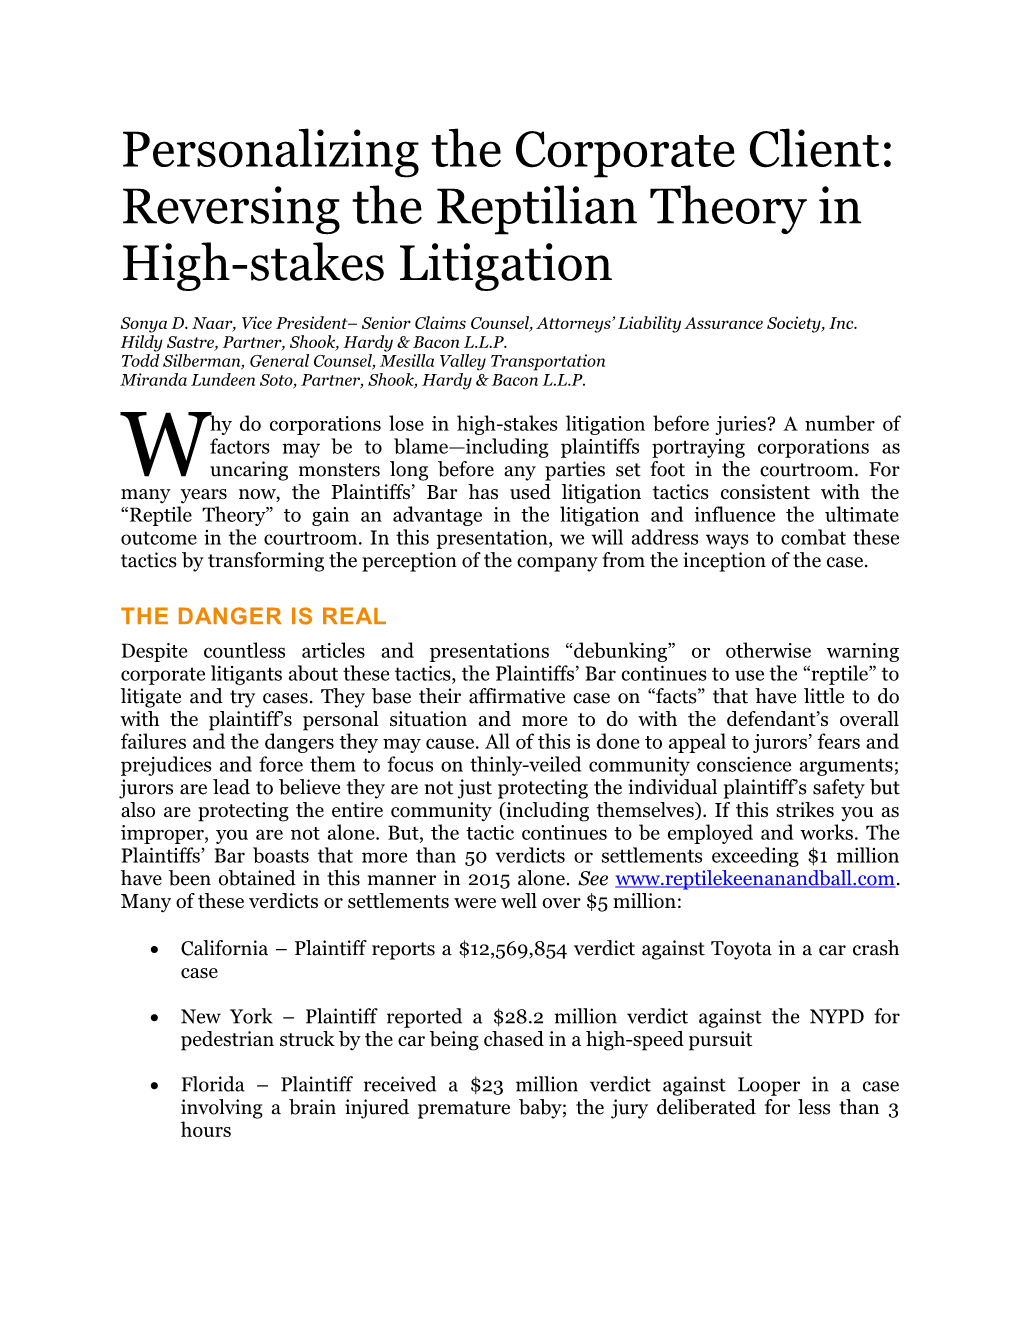 Personalizing the Corporate Client: Reversing the Reptilian Theory in High-Stakes Litigation